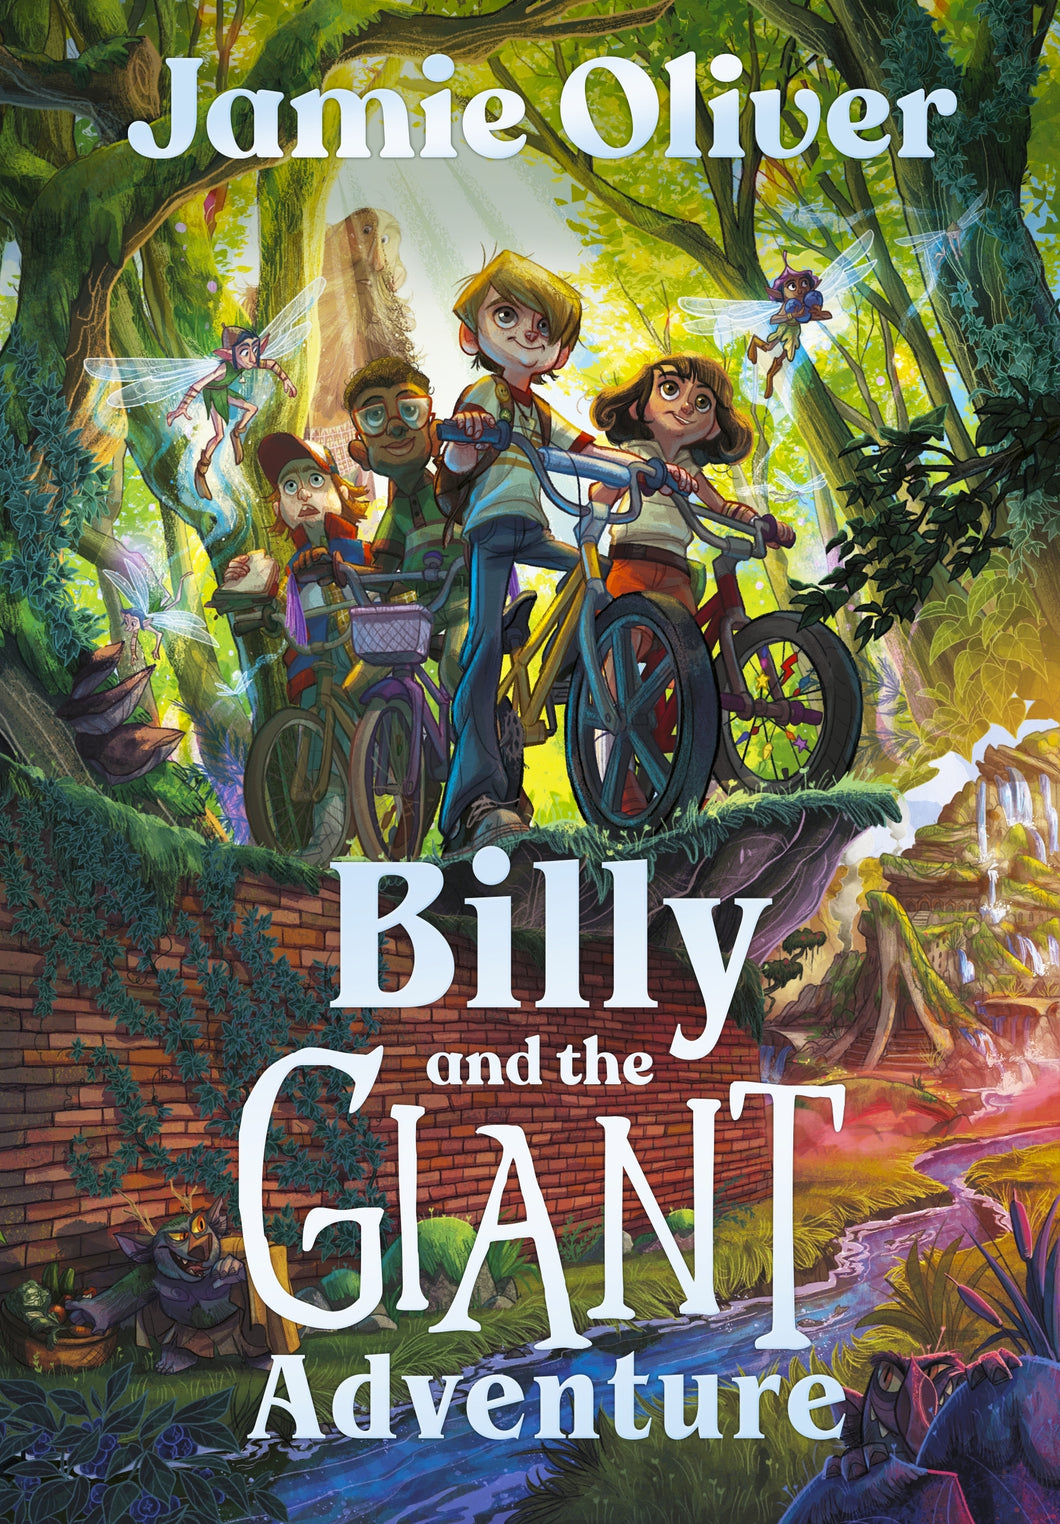 Billy and the Giant Adventure by Jamie Oliver